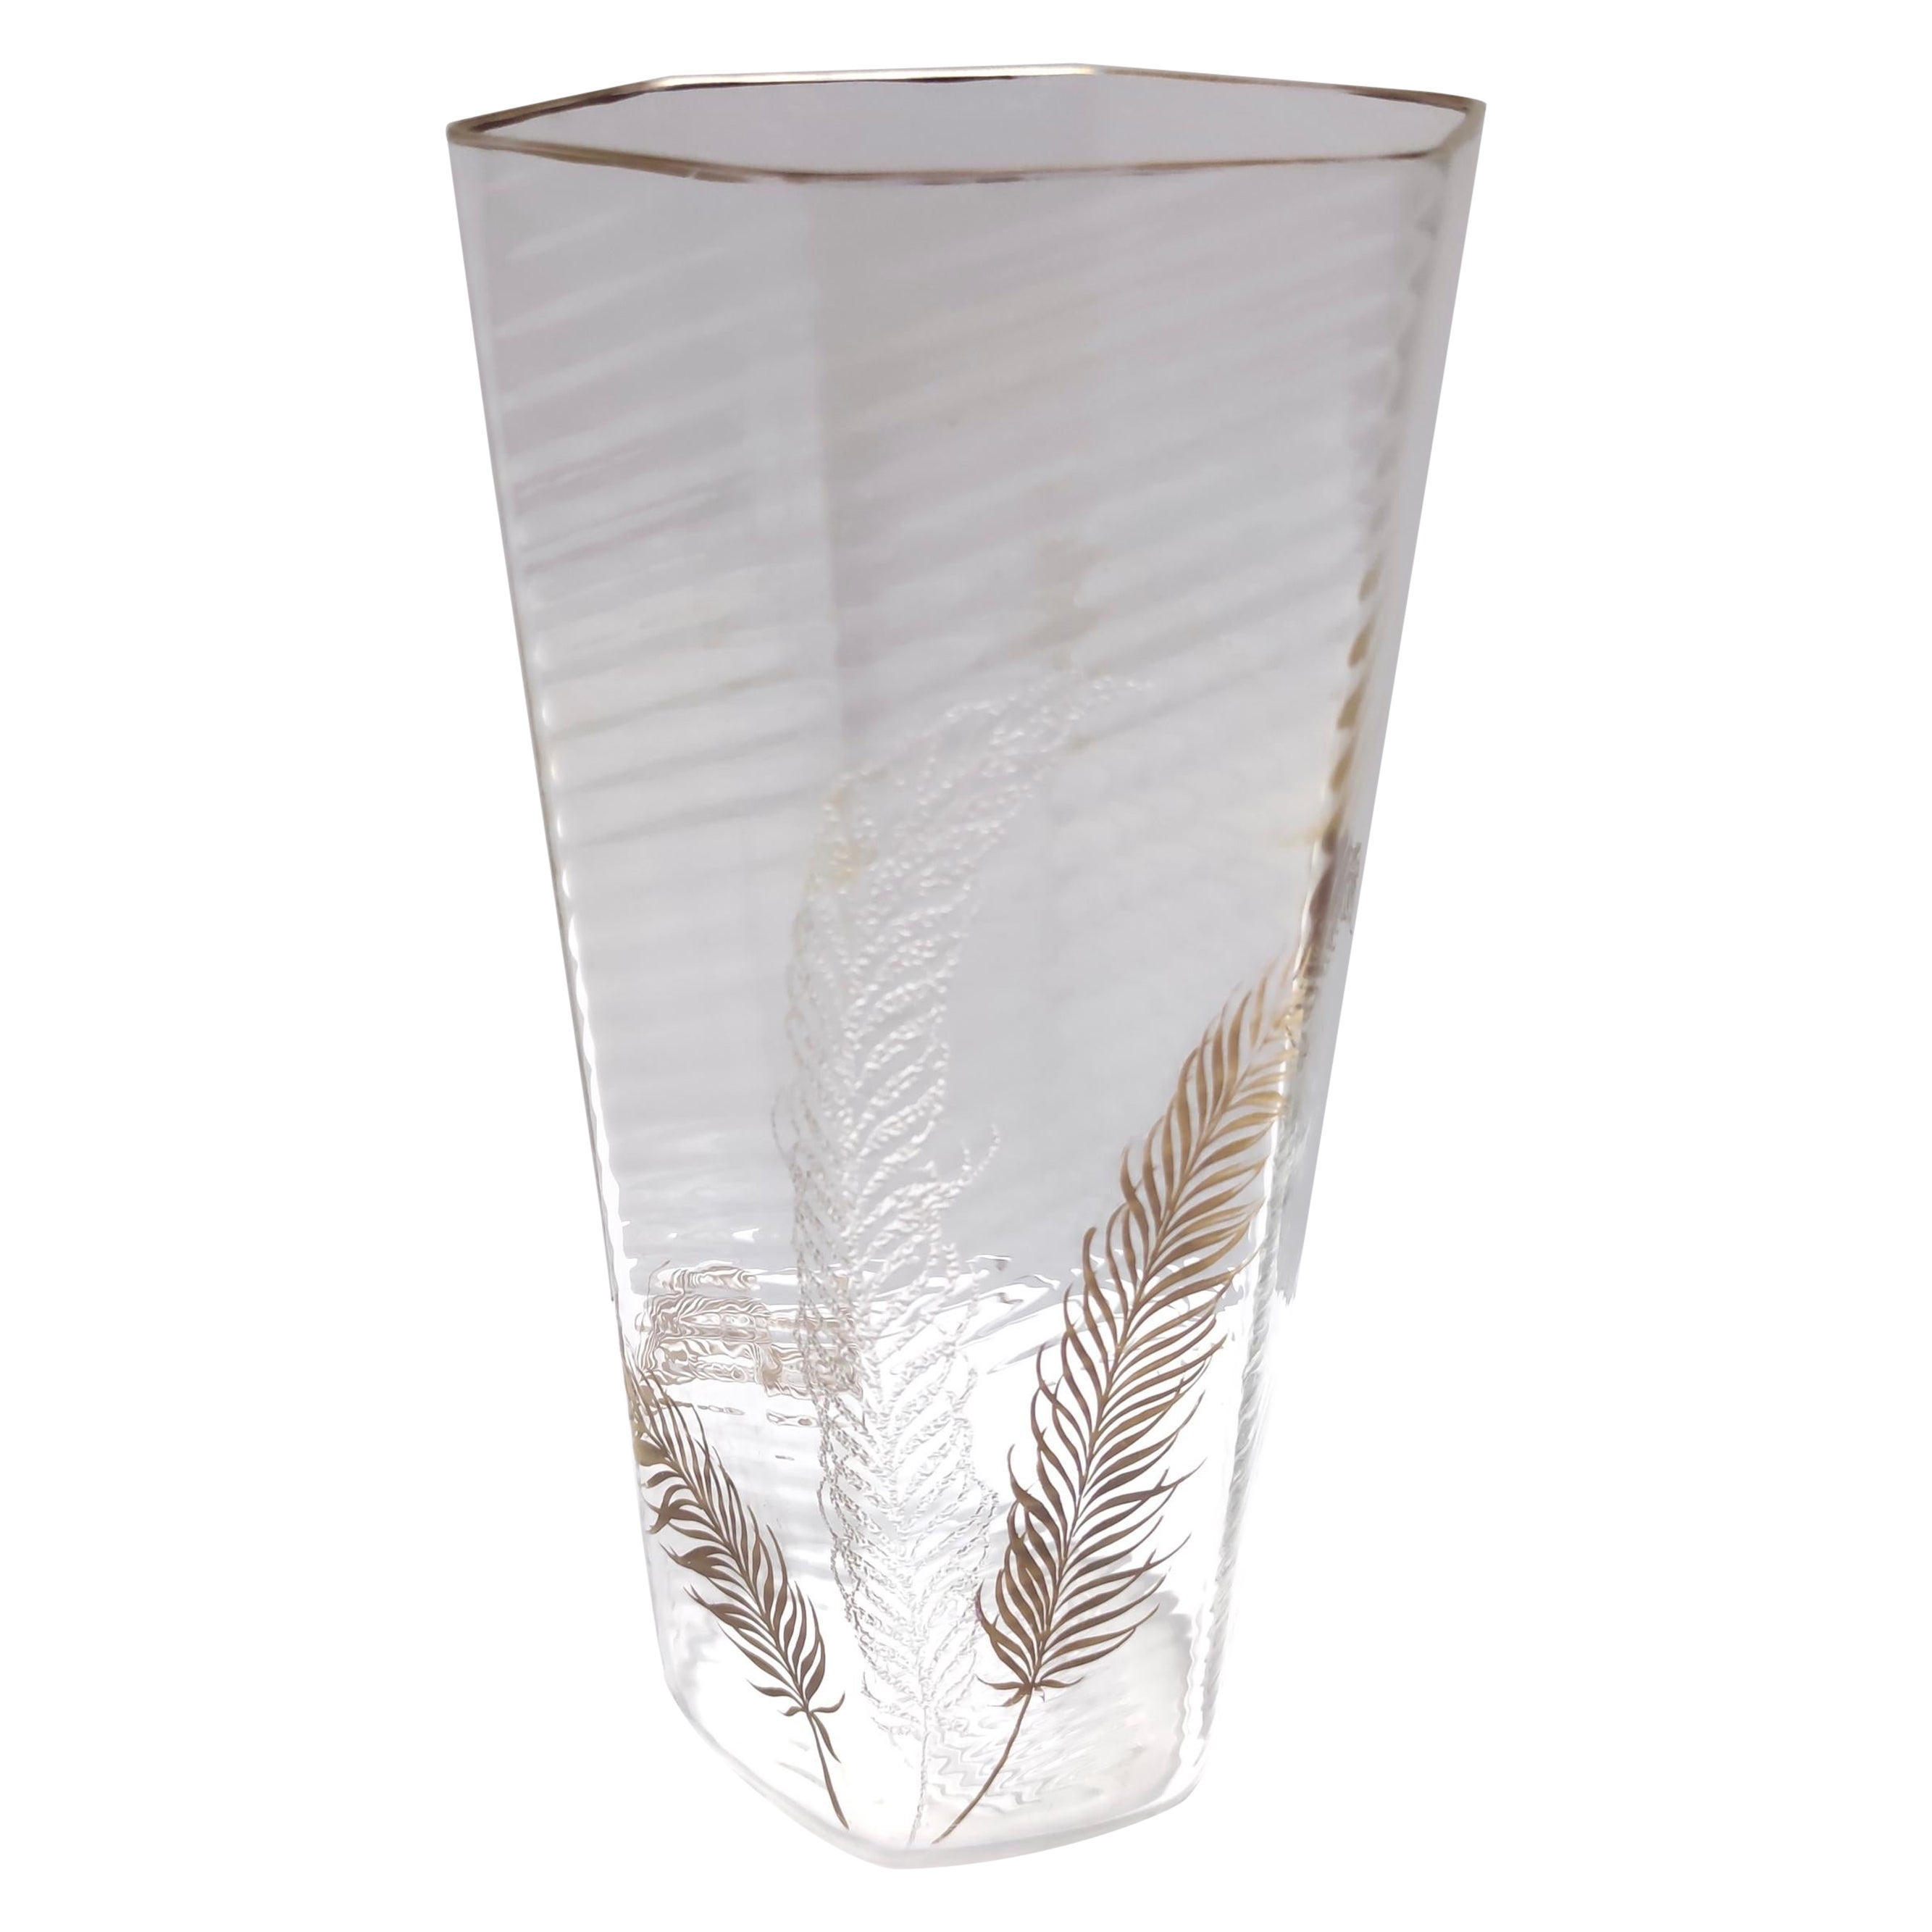 Rare and Elegant Transparent and Gold Hexagonal Murano Glass Vase by Cenedese